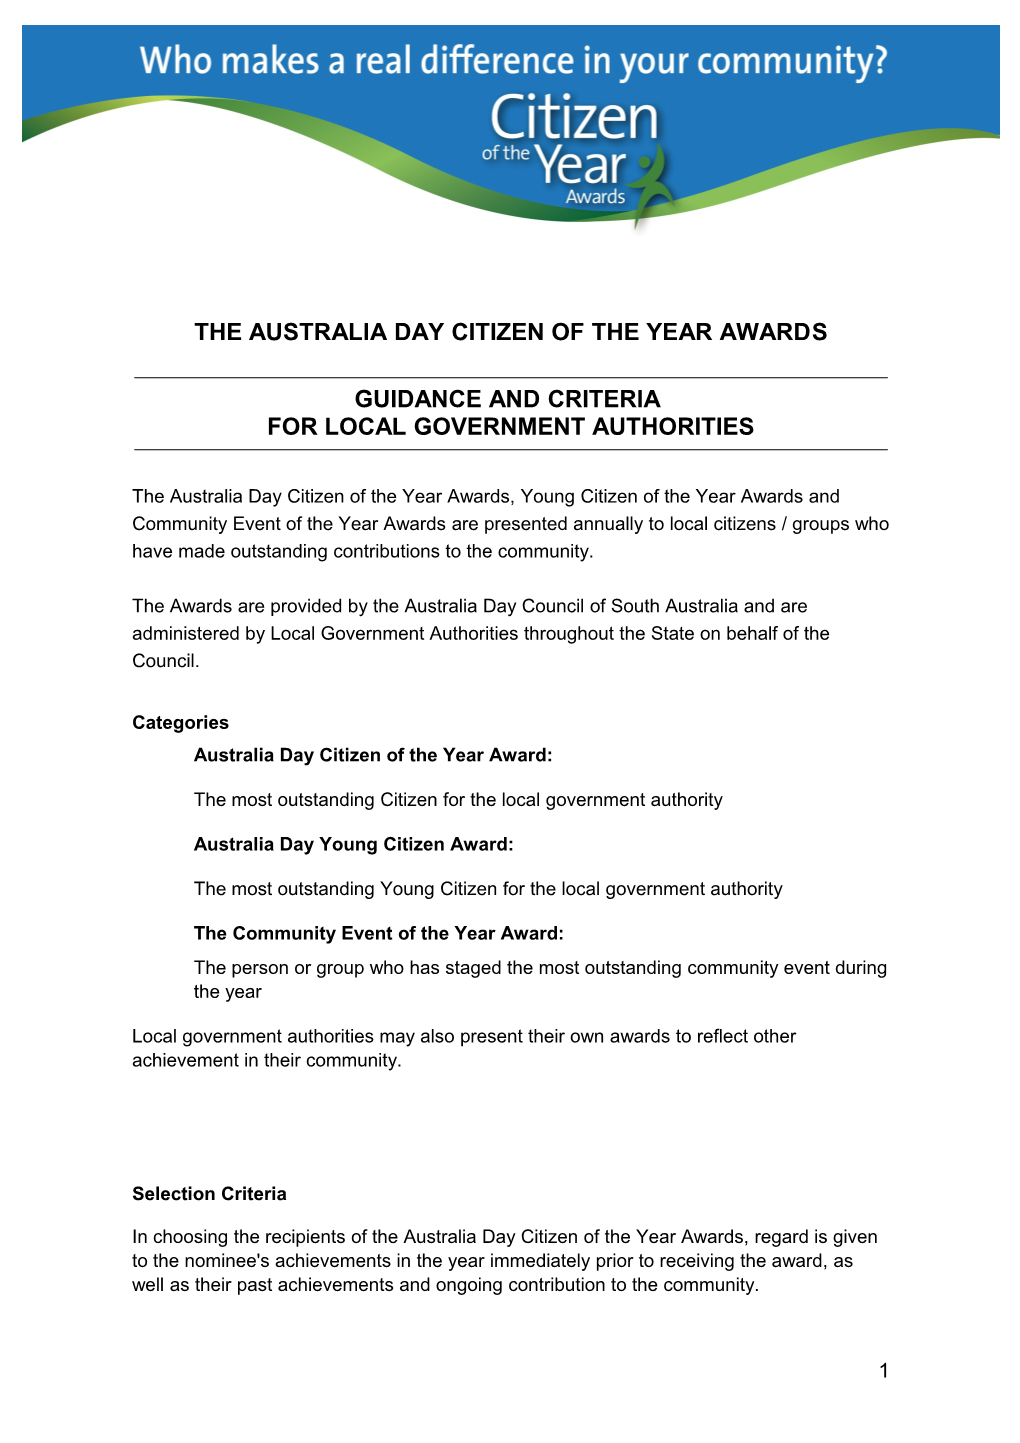 Australia Day Citizen and Young Citizen Awards